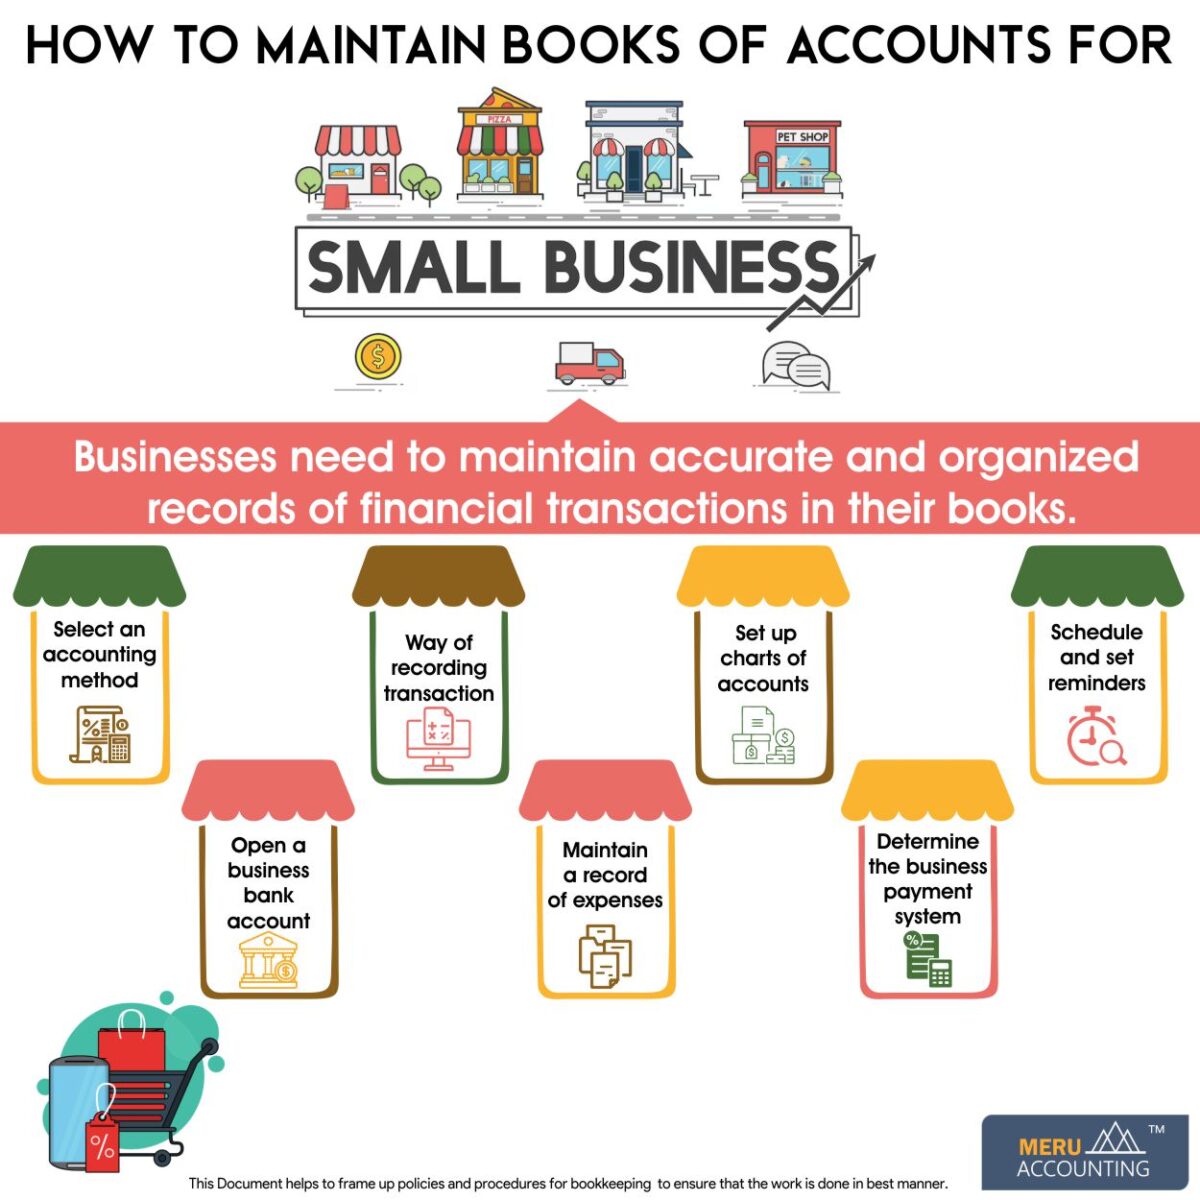 Your Business Financial Account